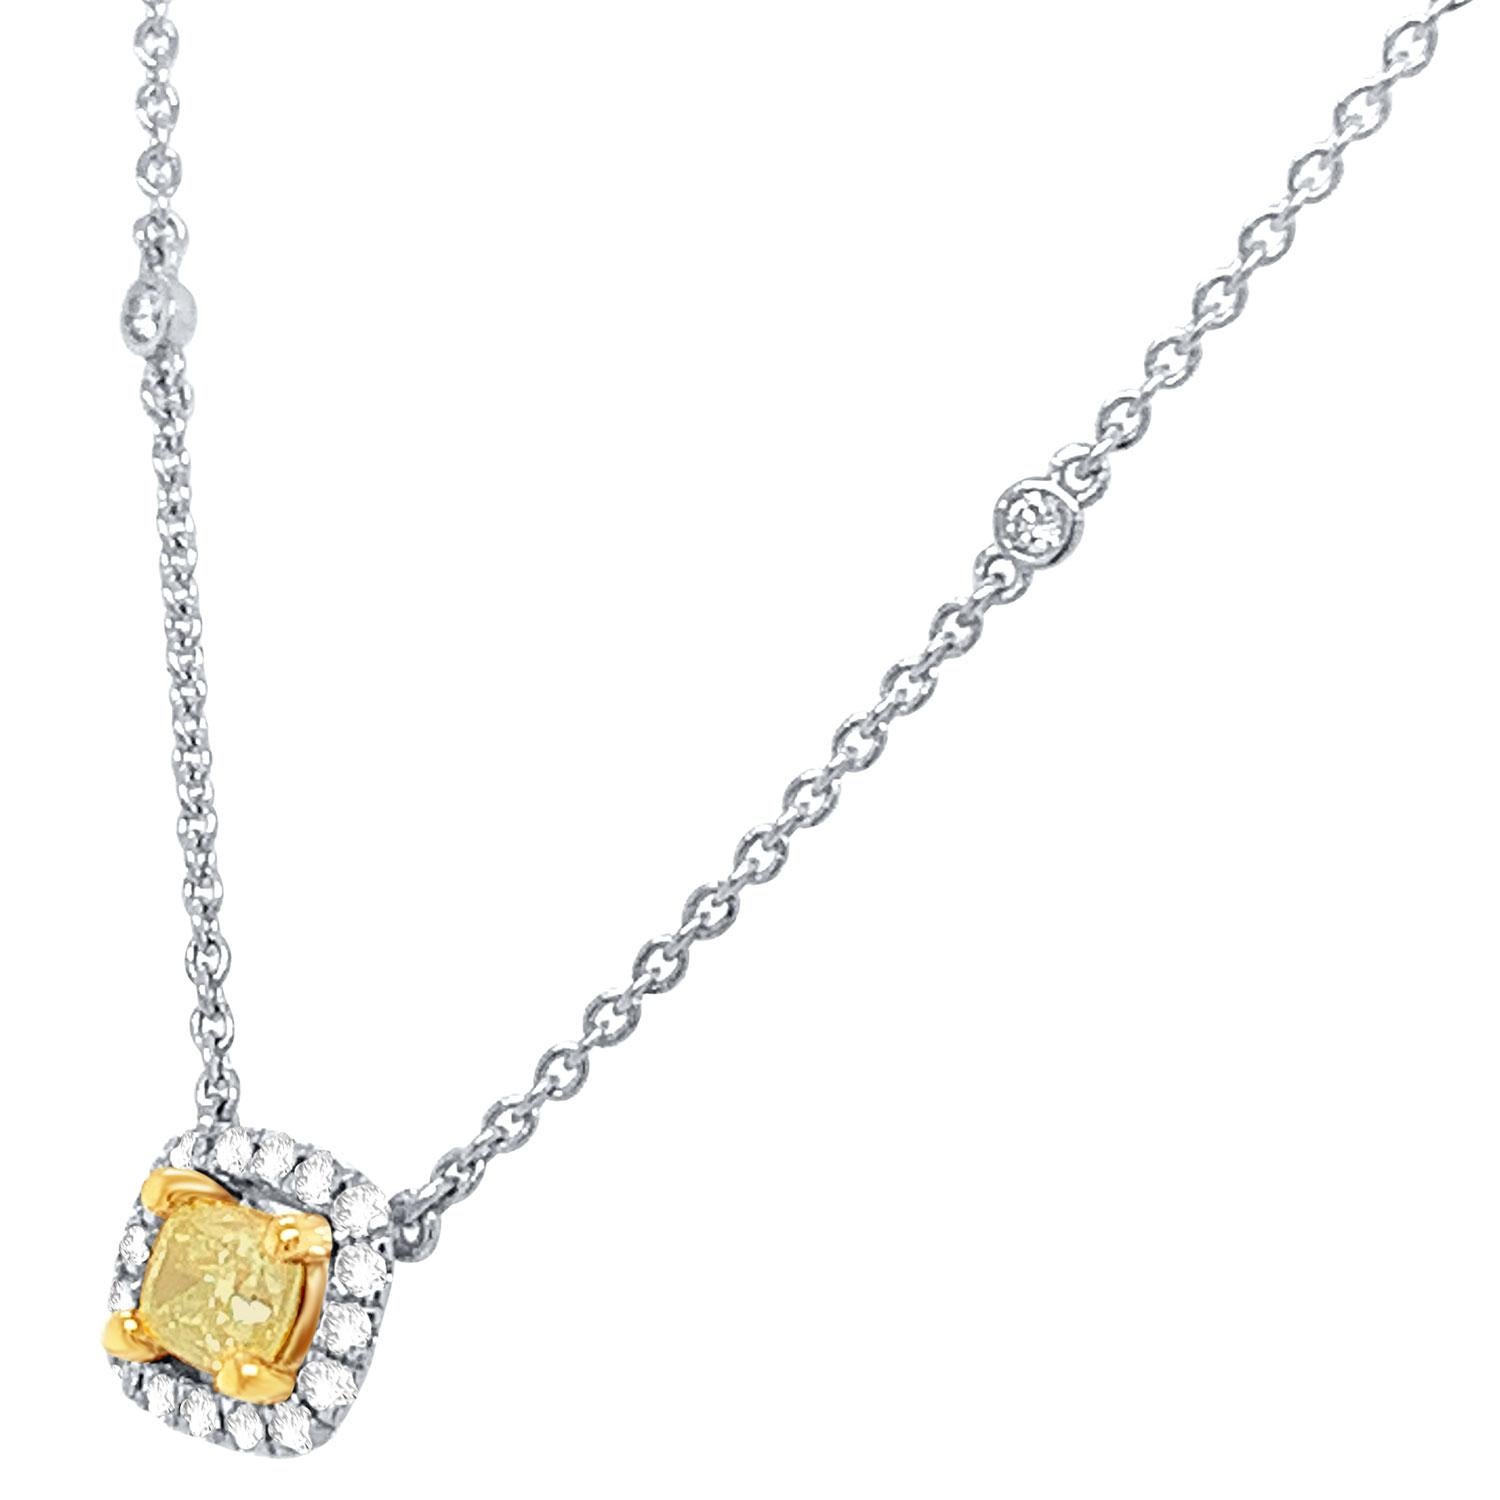 This stunning 18k White gold and Yellow gold necklace feature a 0.55 Carat Yellow Elongated cushion-shaped diamond encircled by one row of brilliant round diamonds on a 1 mm station chain containing fourteen (14) round brilliant diamonds bezel